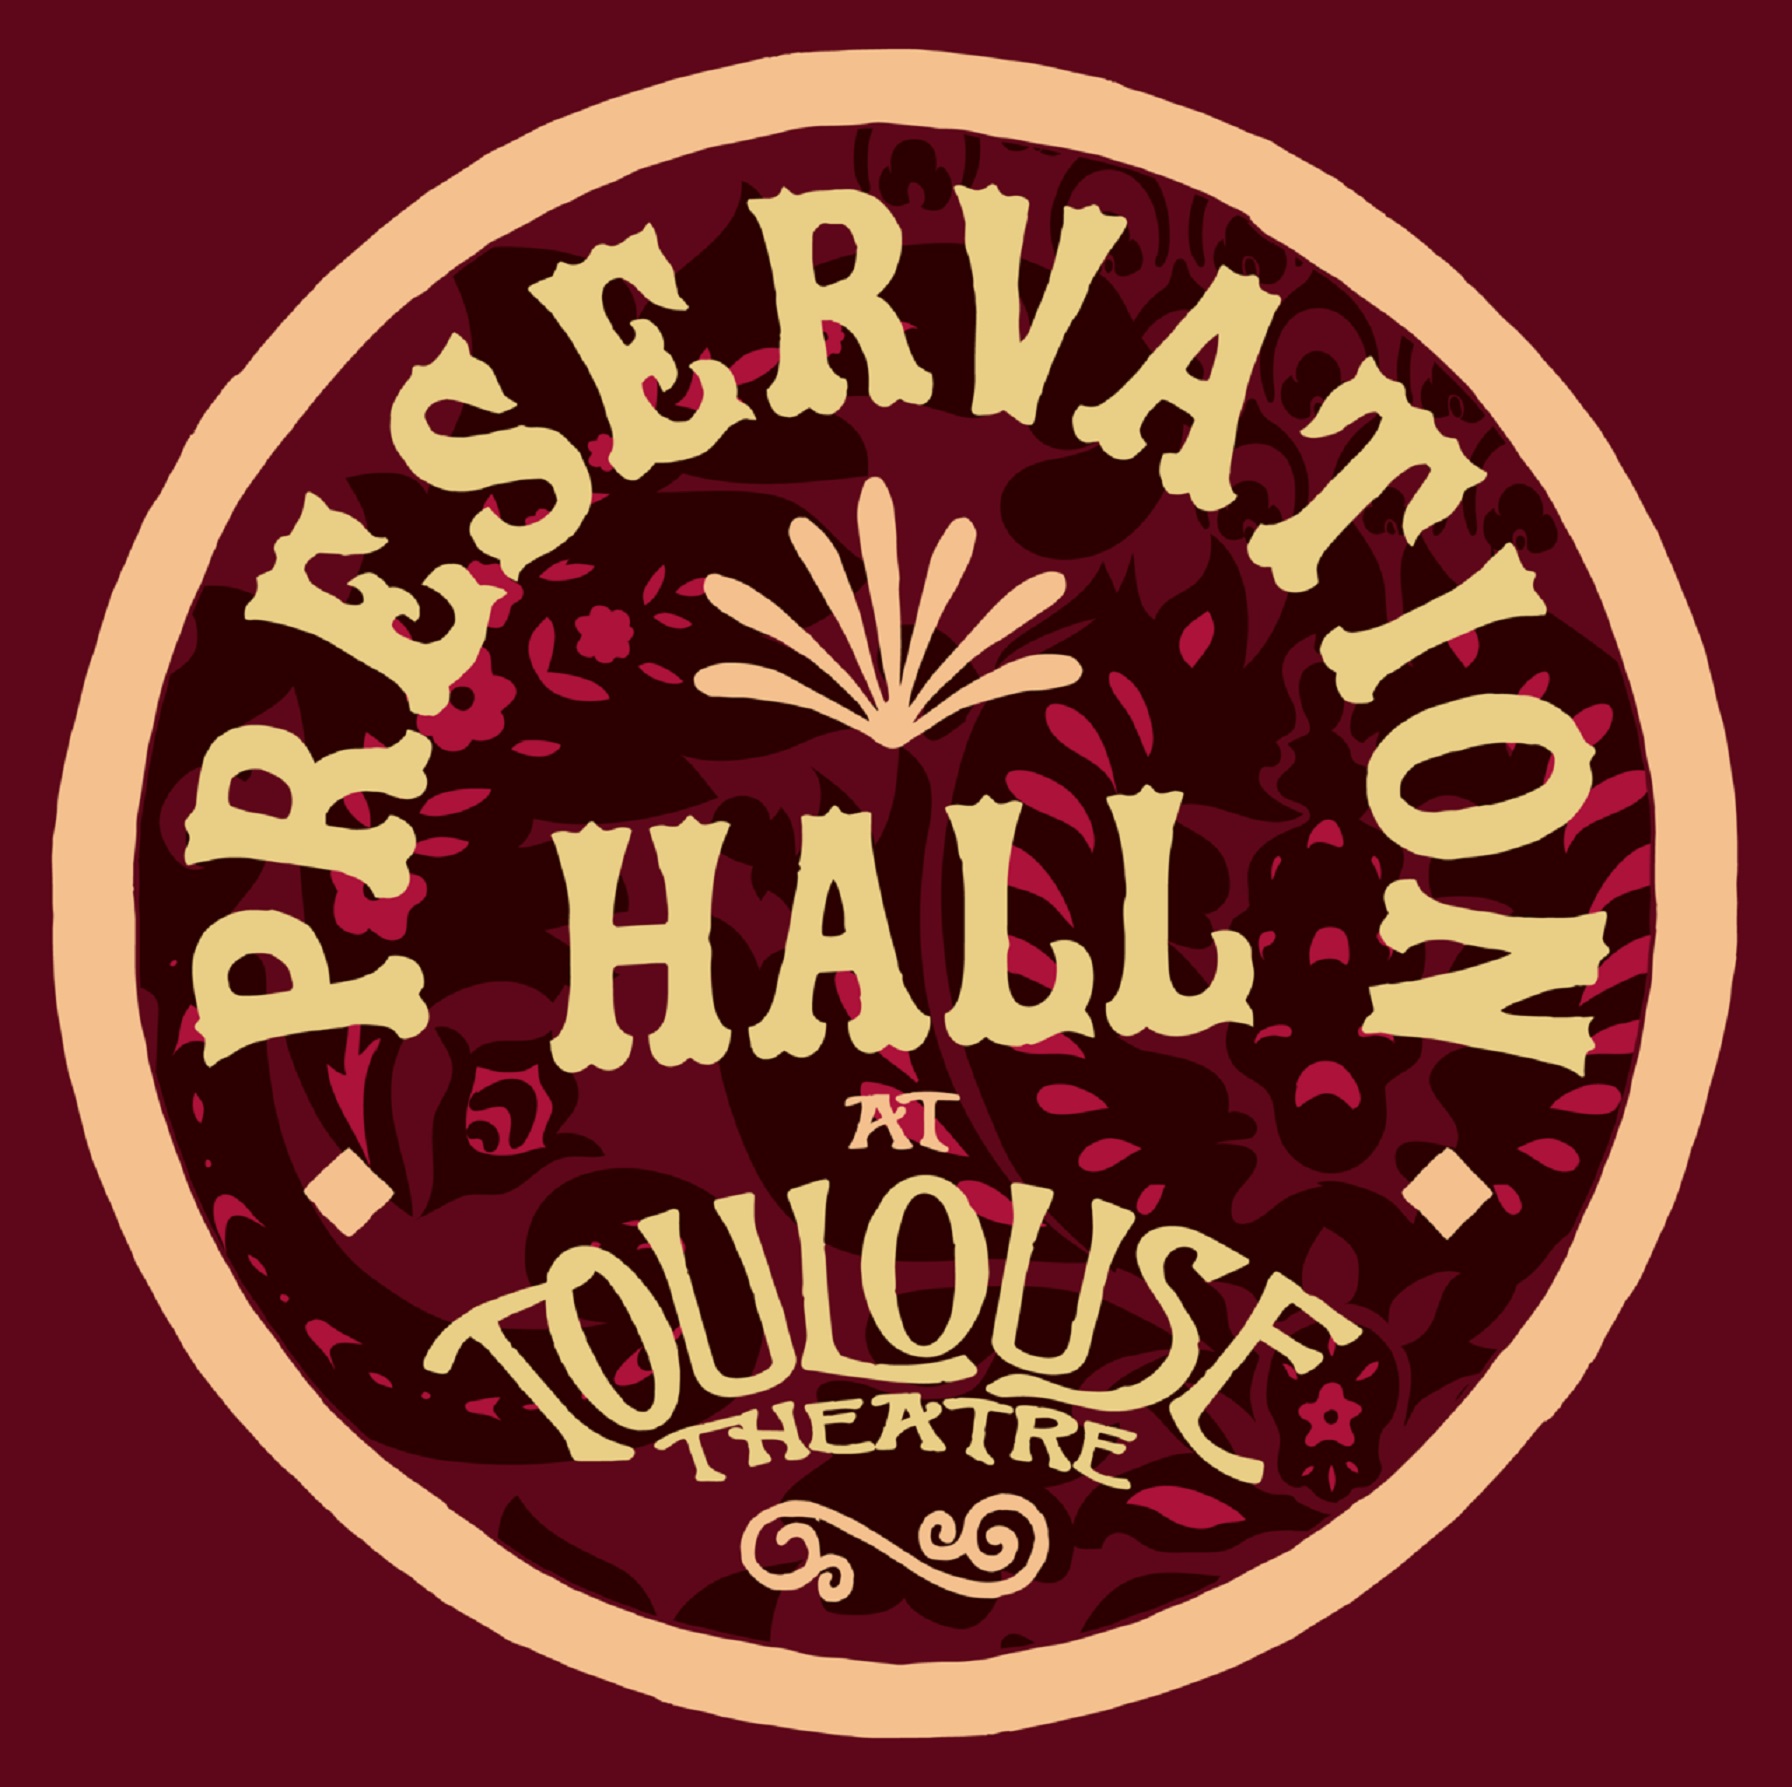 Preservation Hall Summer Residency at Toulouse Theatre